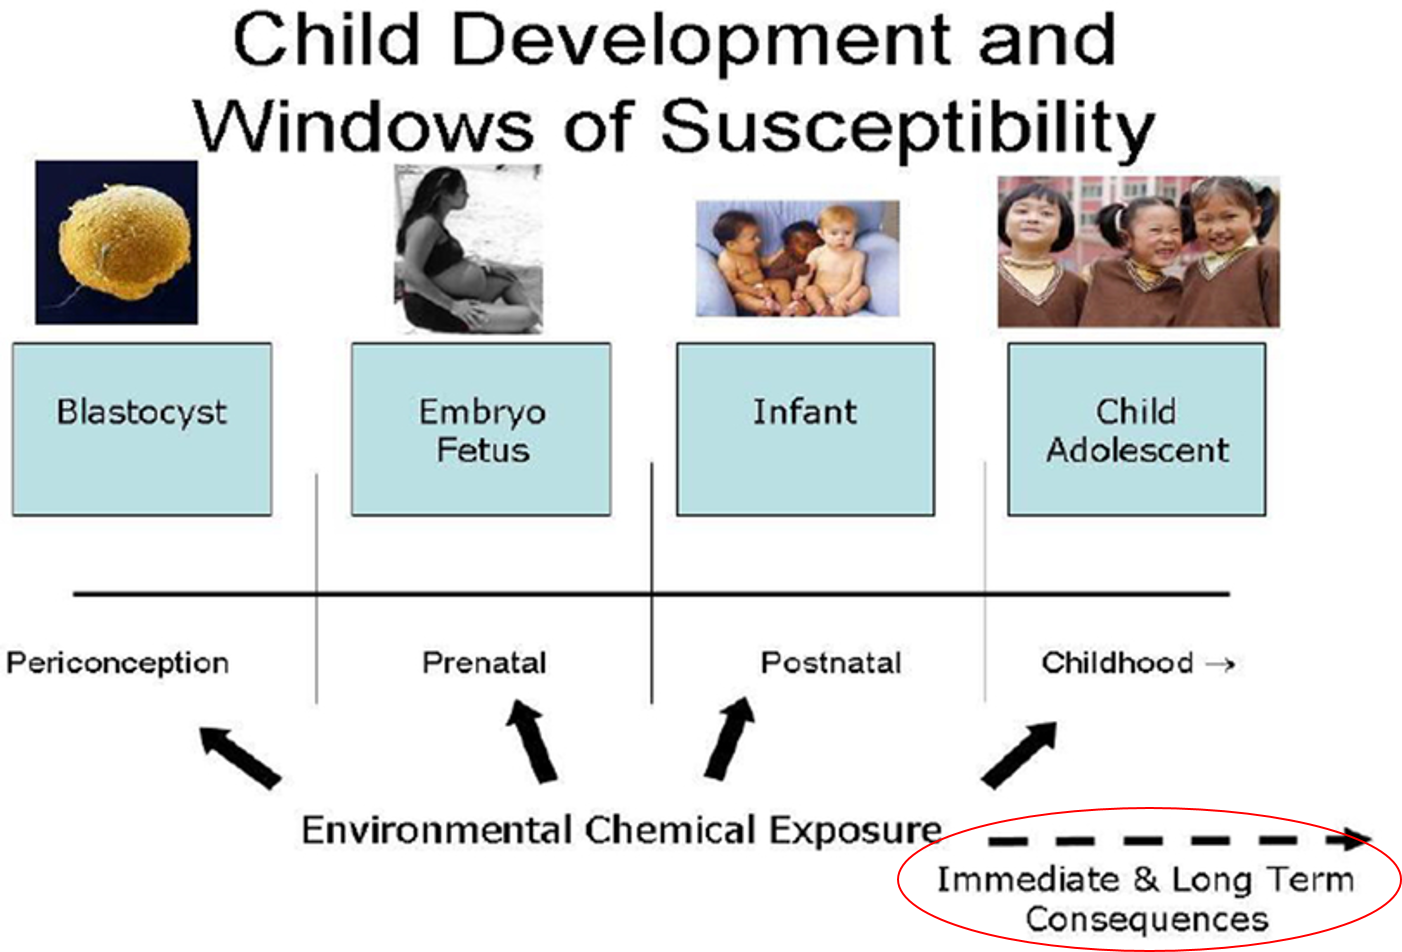 Environmental chemical exposure during preconception at blastocyst; prenatal for embryo and fetus; postnatal for infant; childhood for child through adolescent has immediate and long term consequences. 